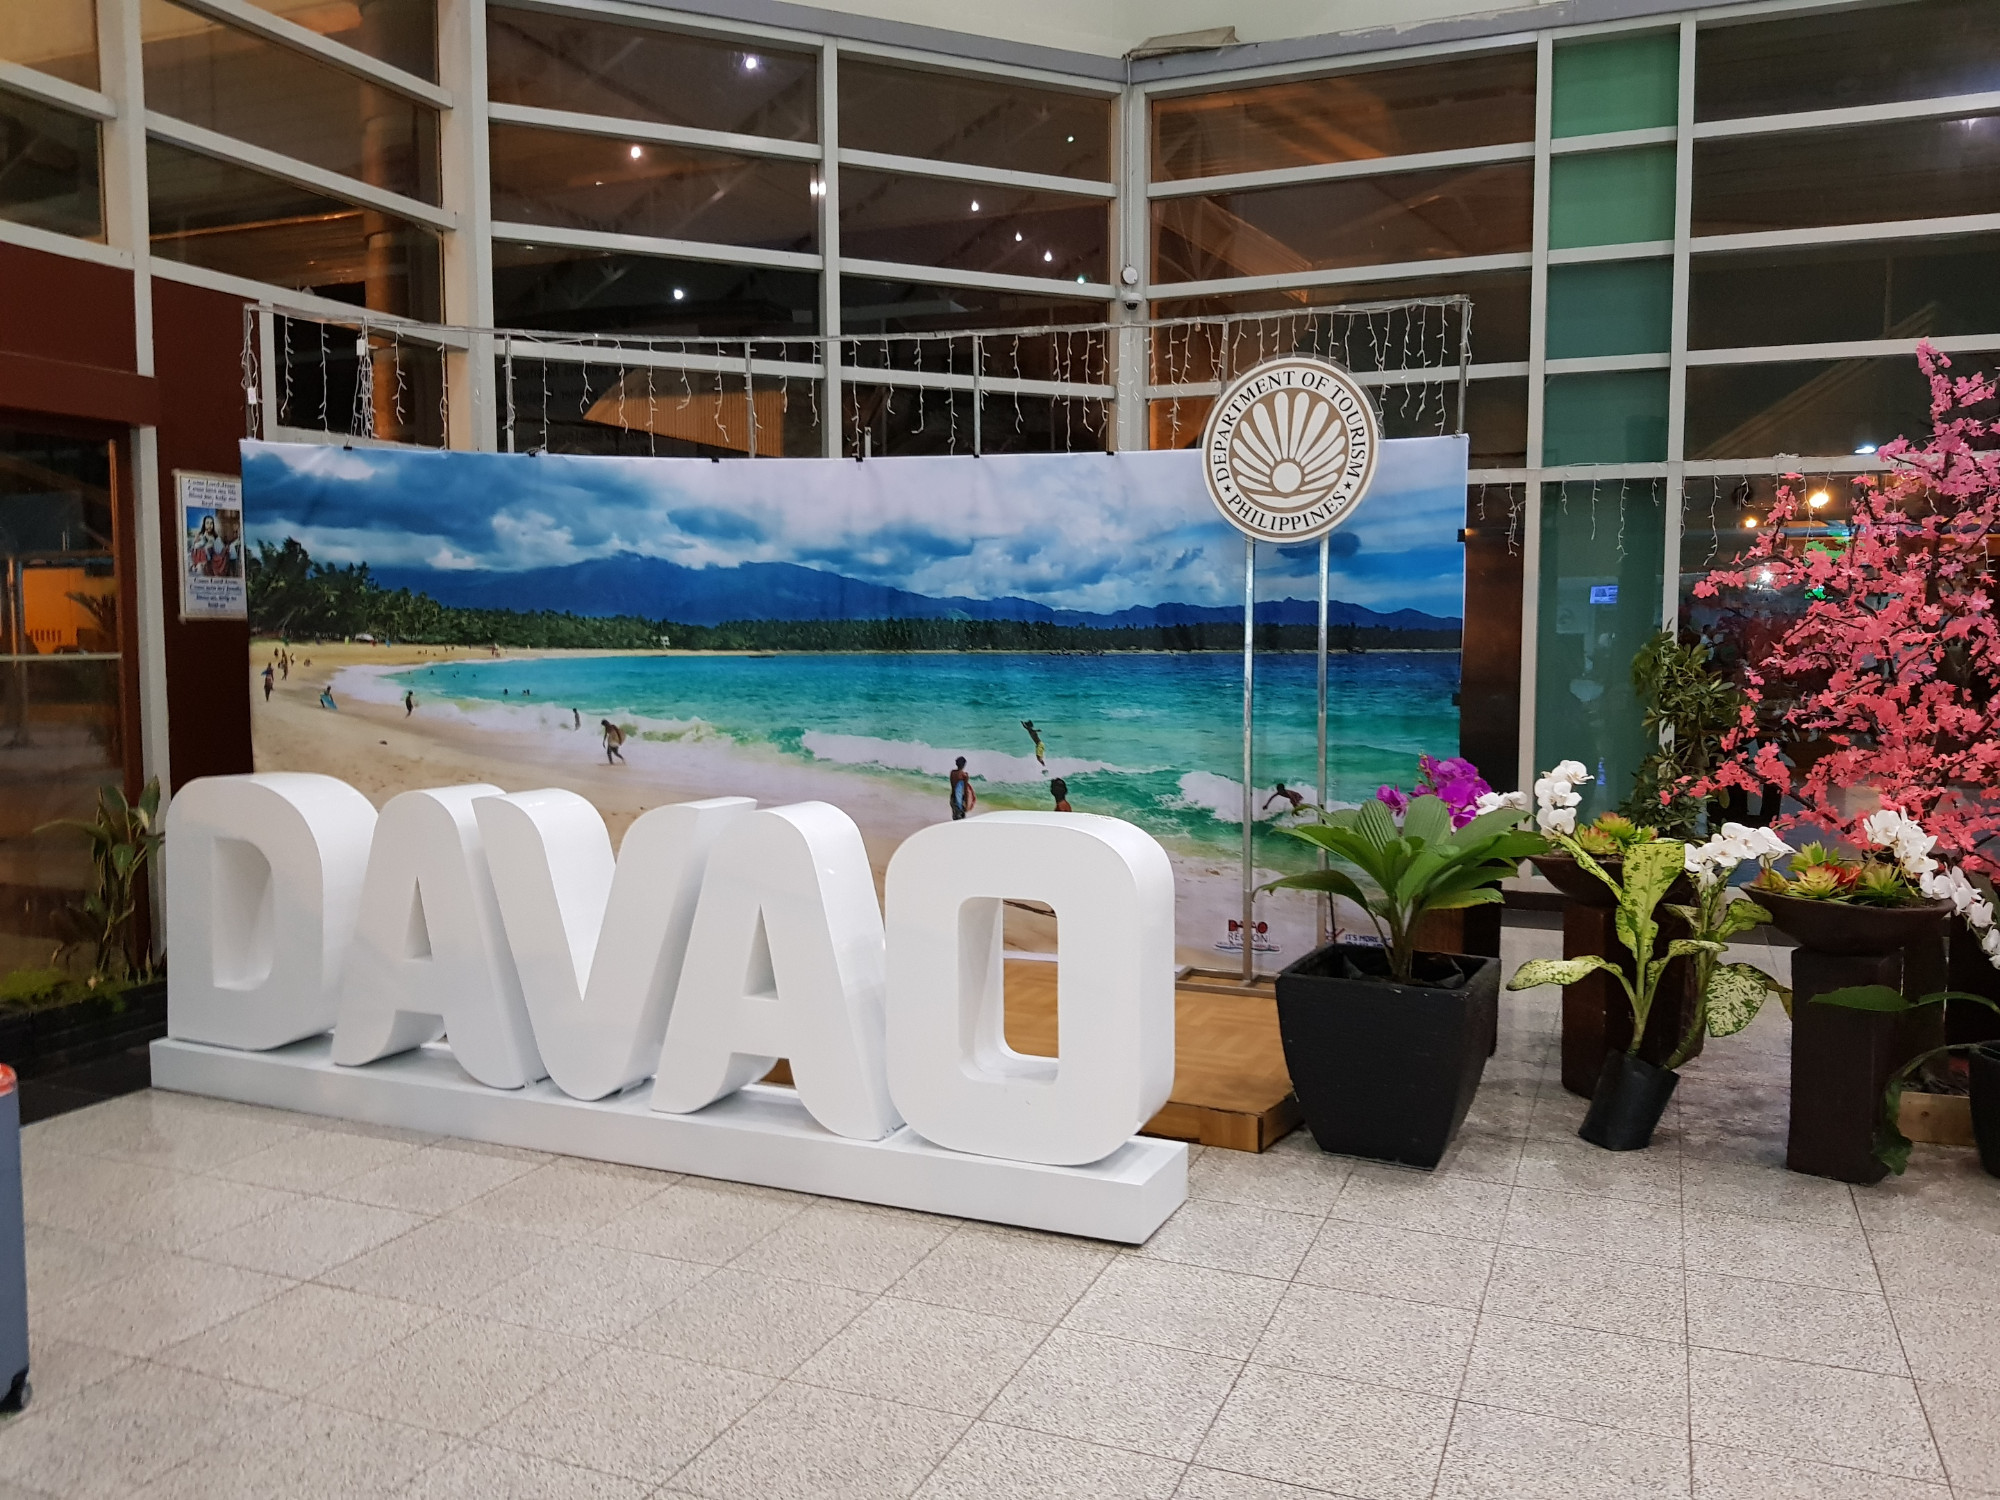 Davao — welcome at the airport